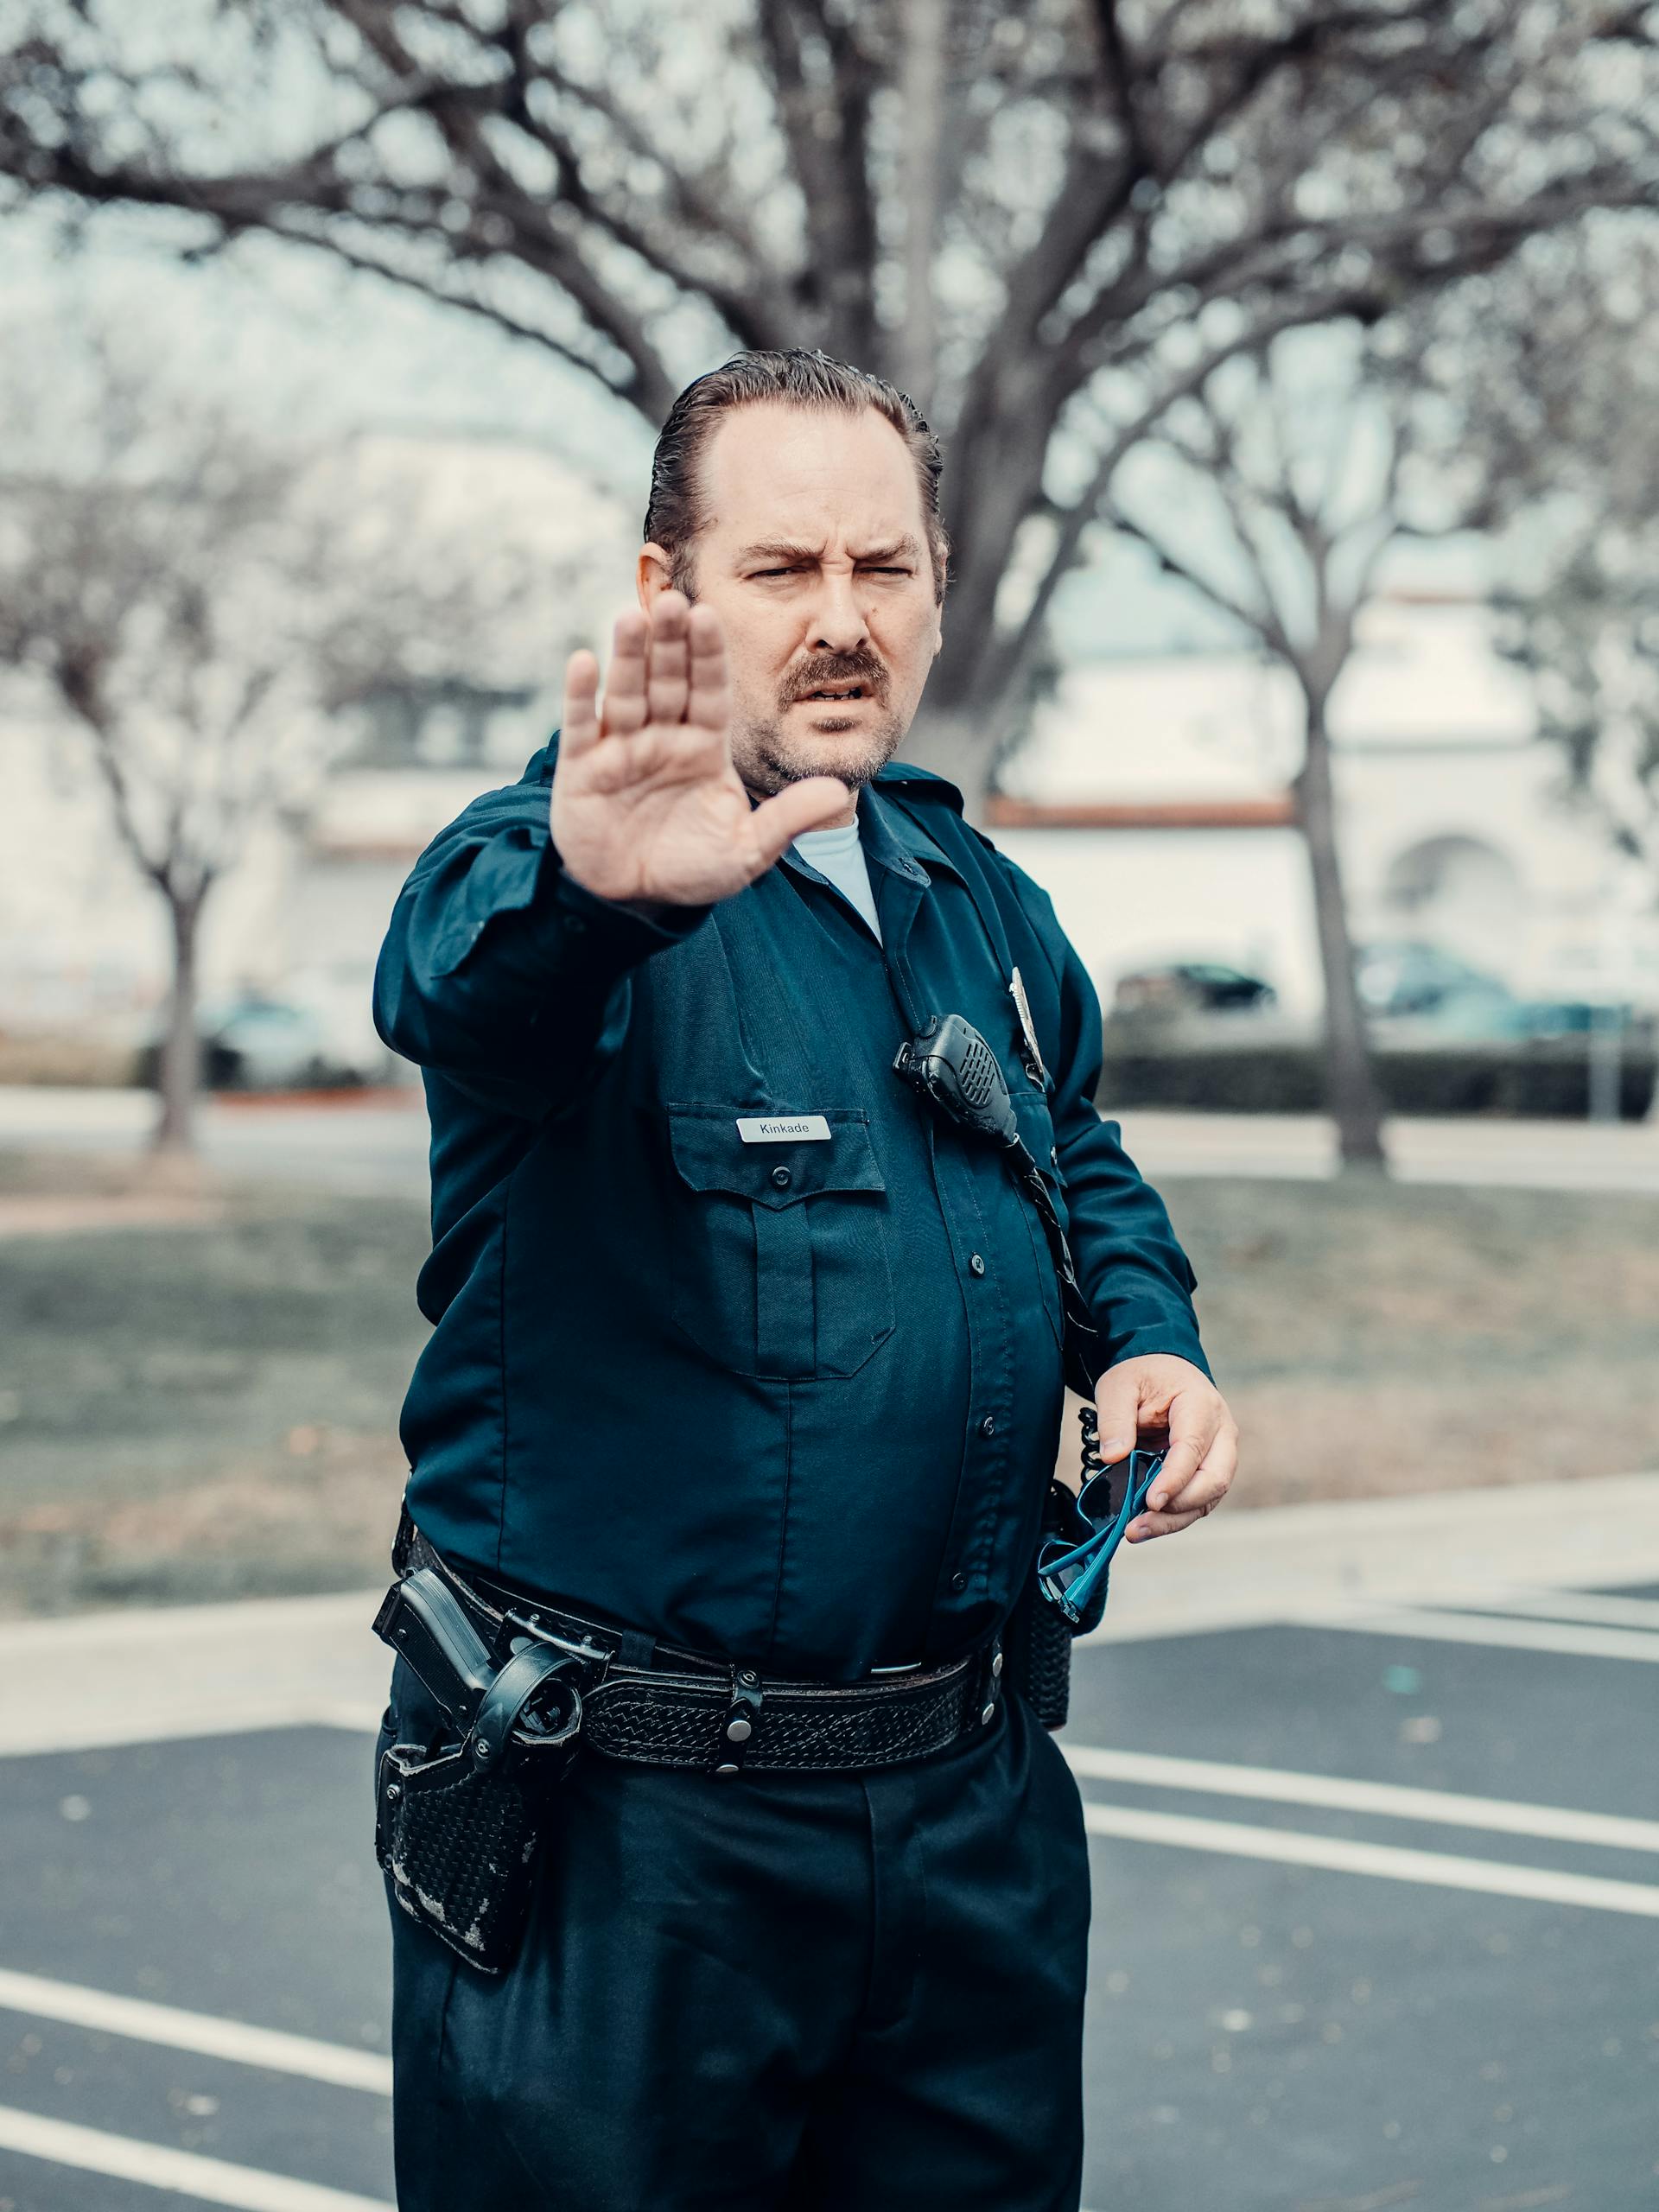 A police officer with his arm raised | Source: Pexels